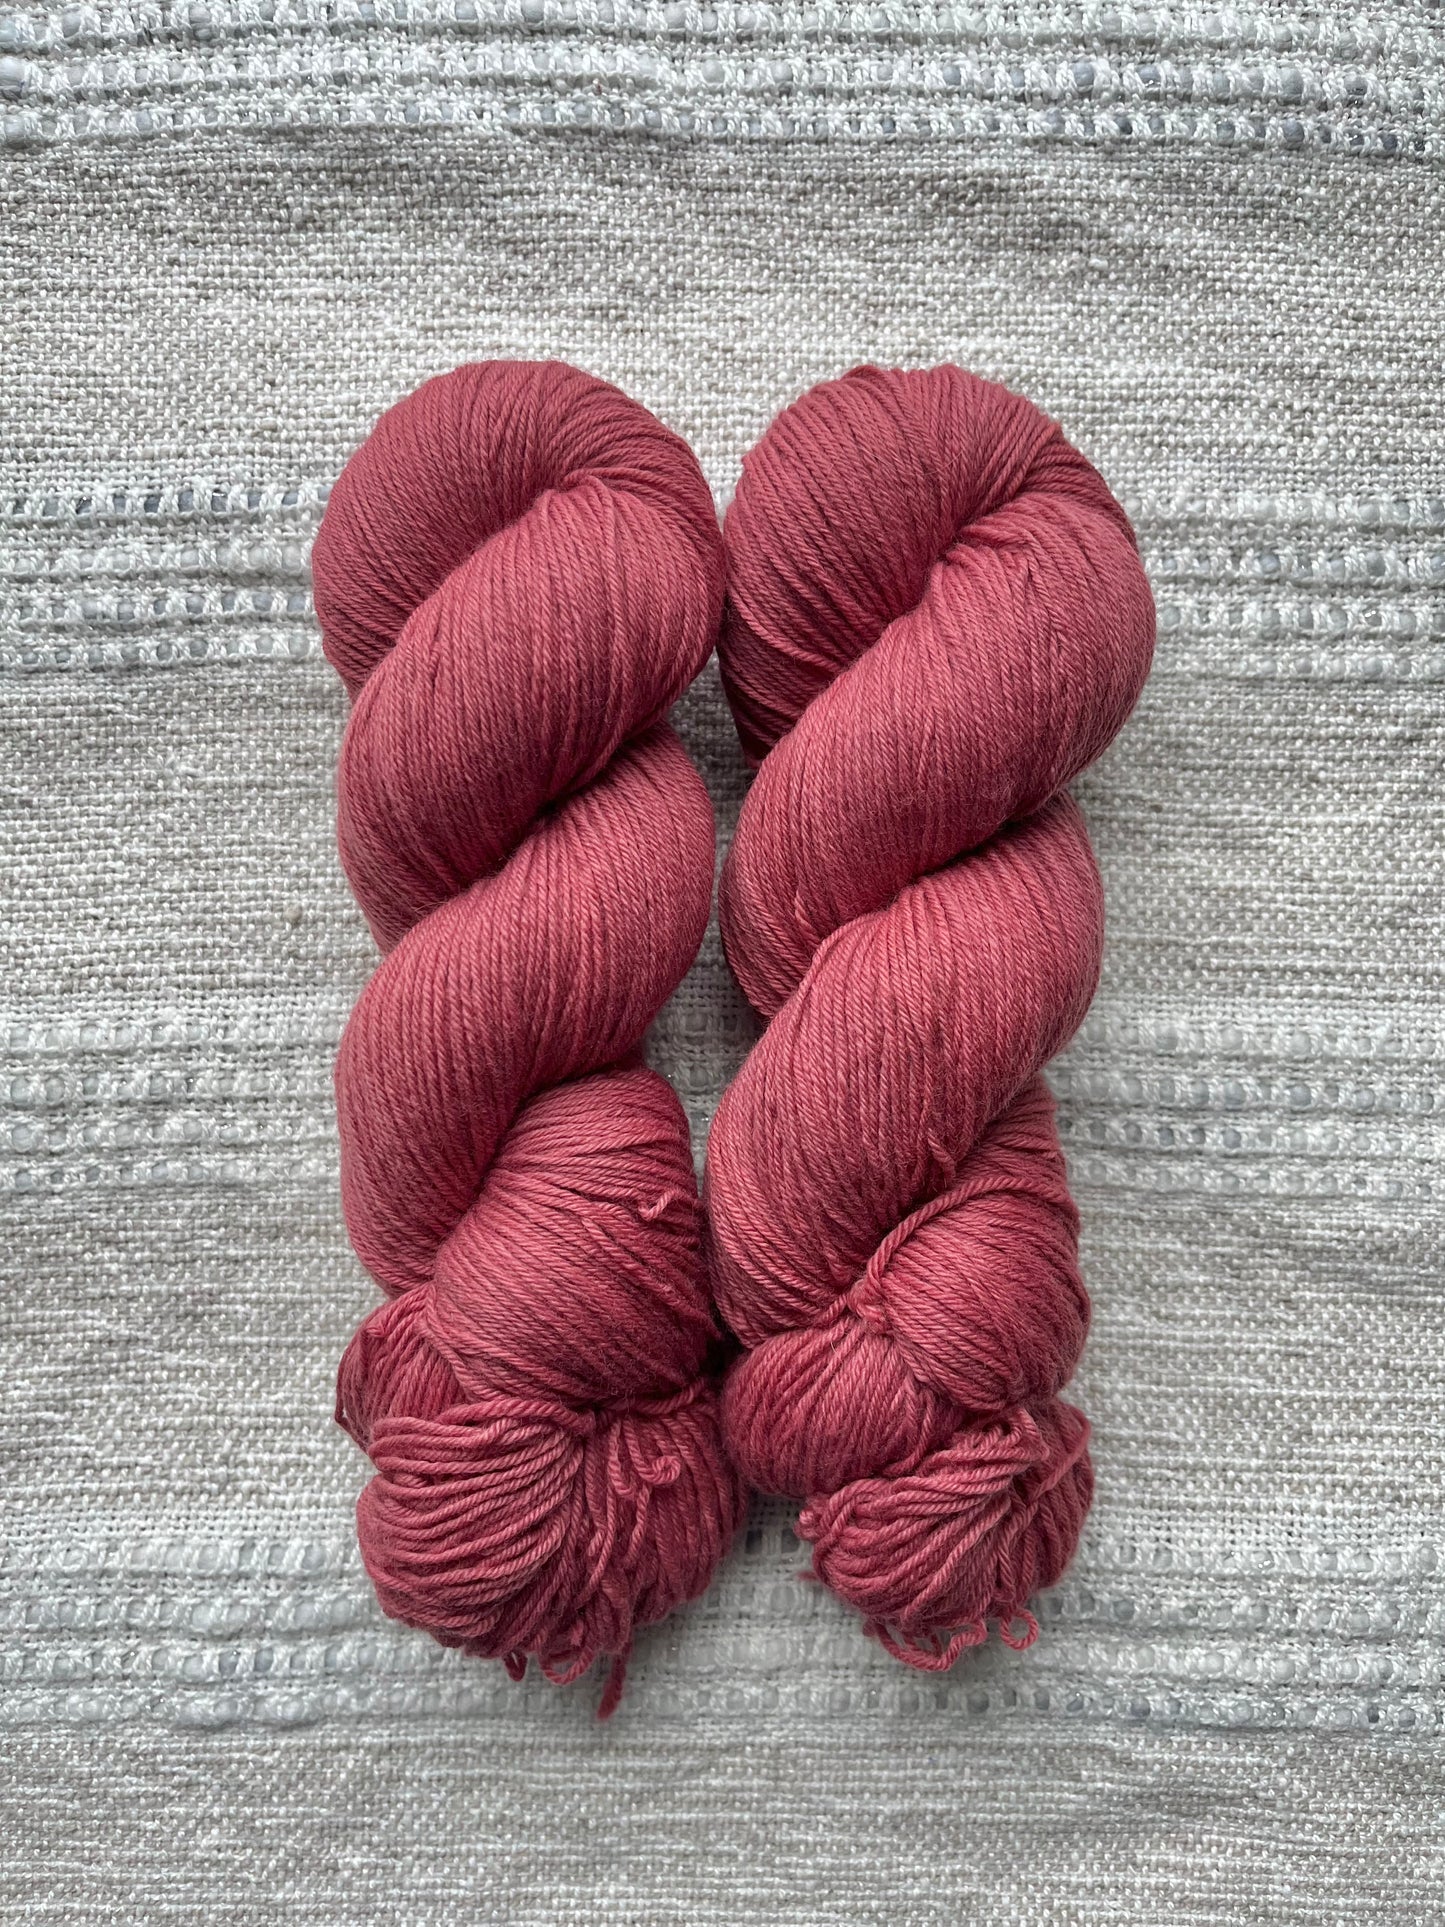 OOAK Red | Extra Pure Sock